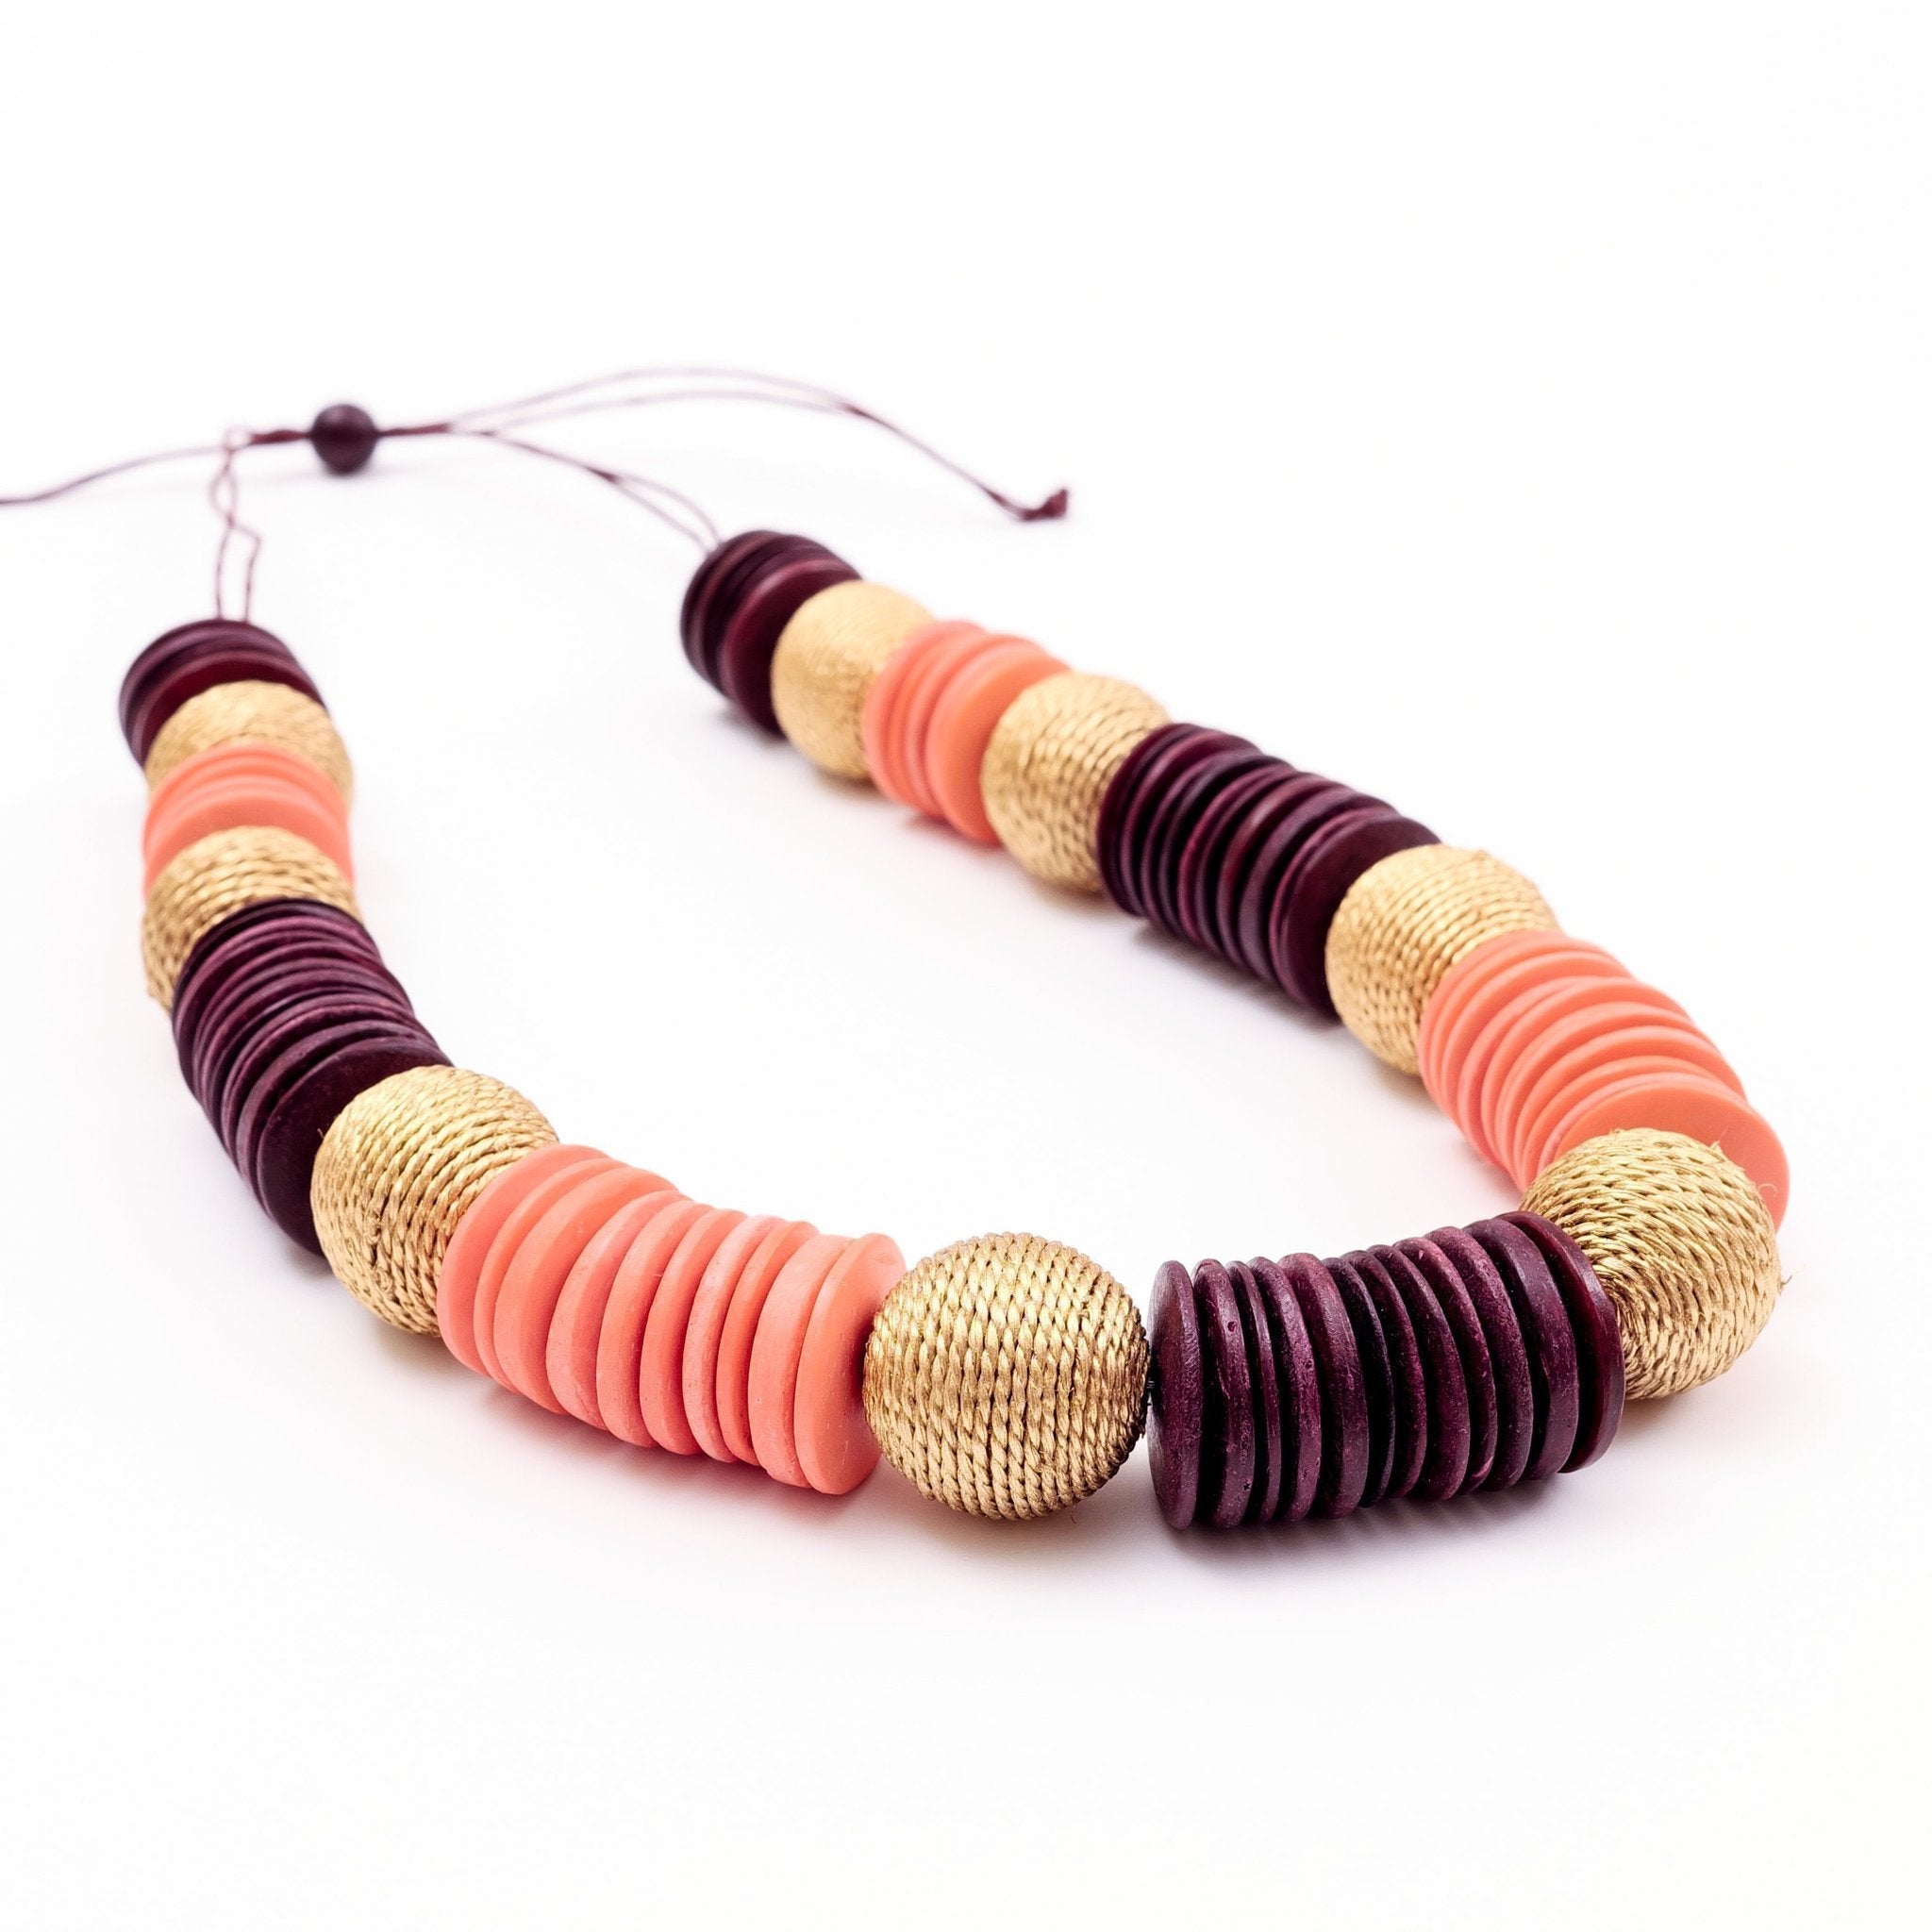 Jewelry - Paparazzi Wooden Necklace - Coral and Burgundy | LIKHÂ - LIKHÂ